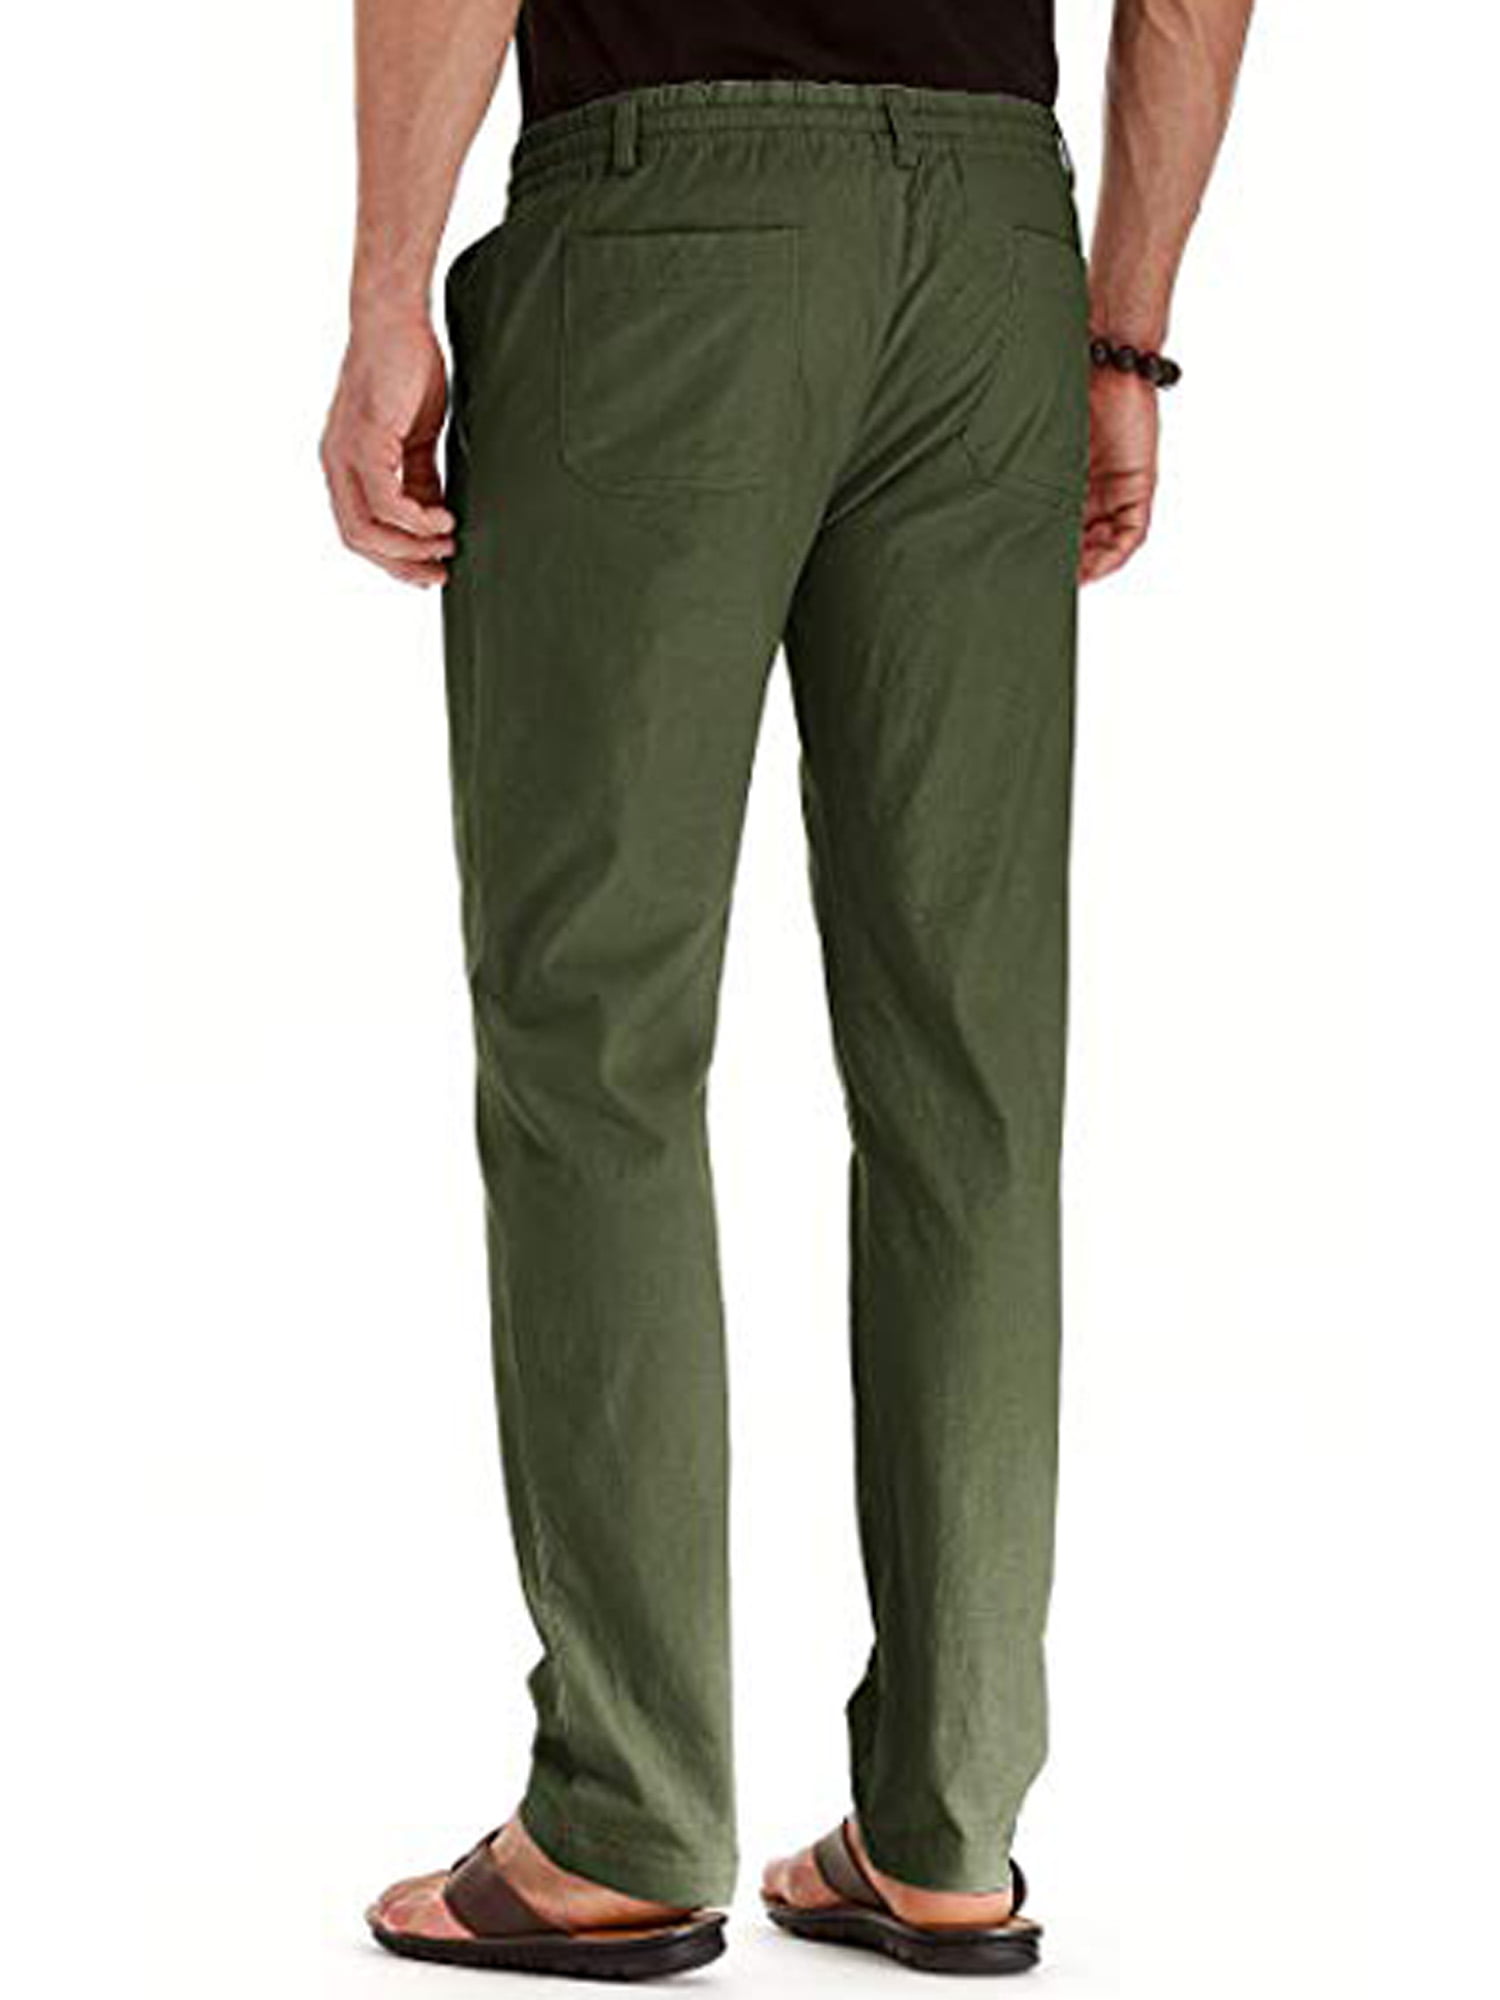 Mens Lightweight Summer Trousers in Mens Trousers for sale  eBay